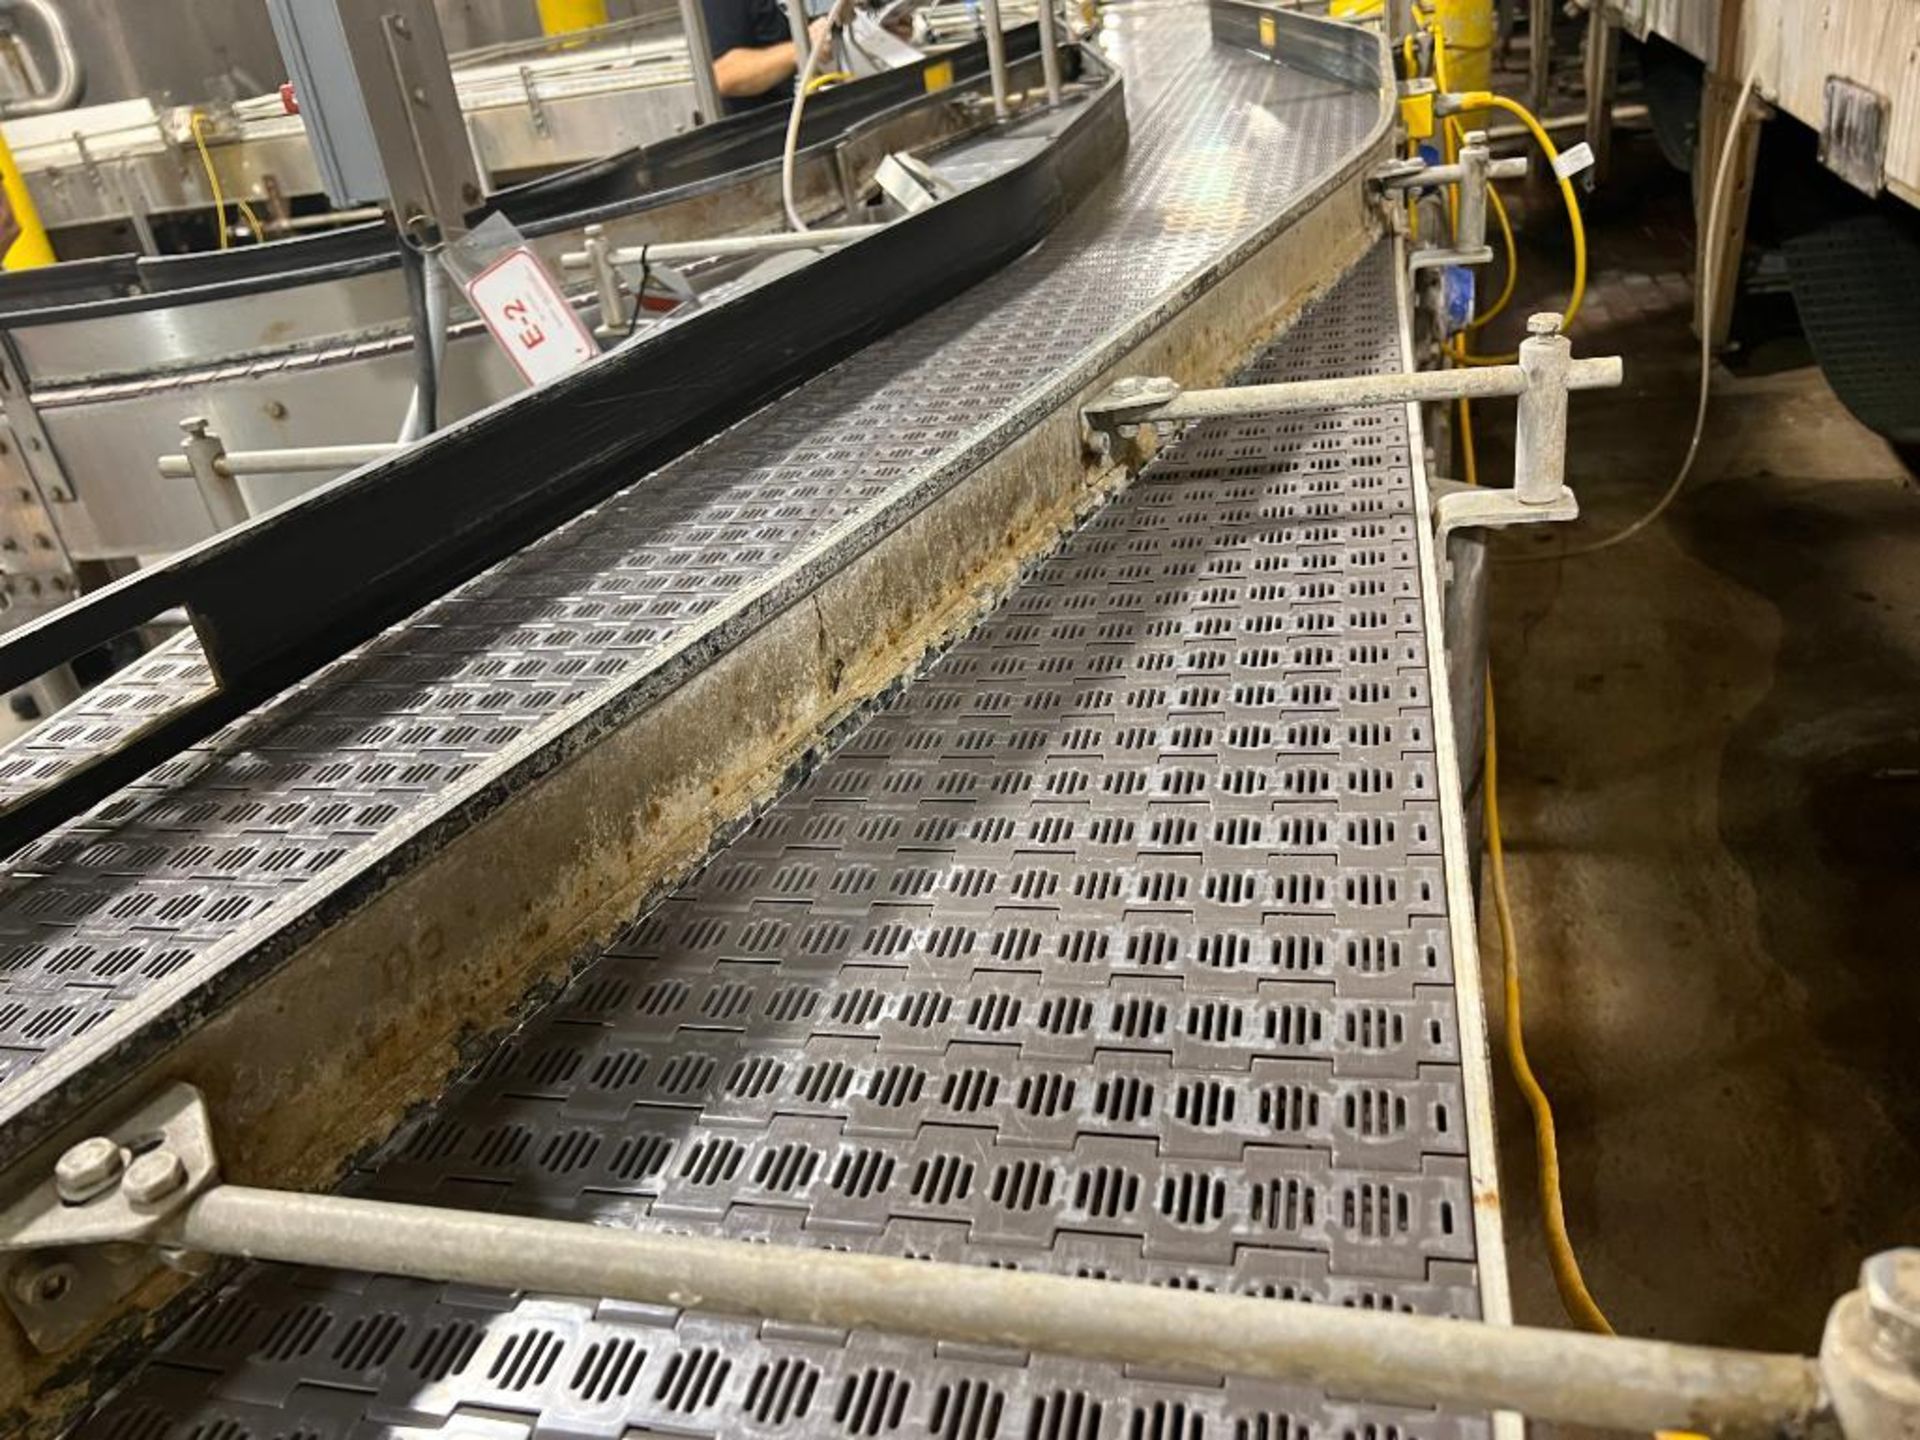 stainless steel can conveyor - Image 2 of 13